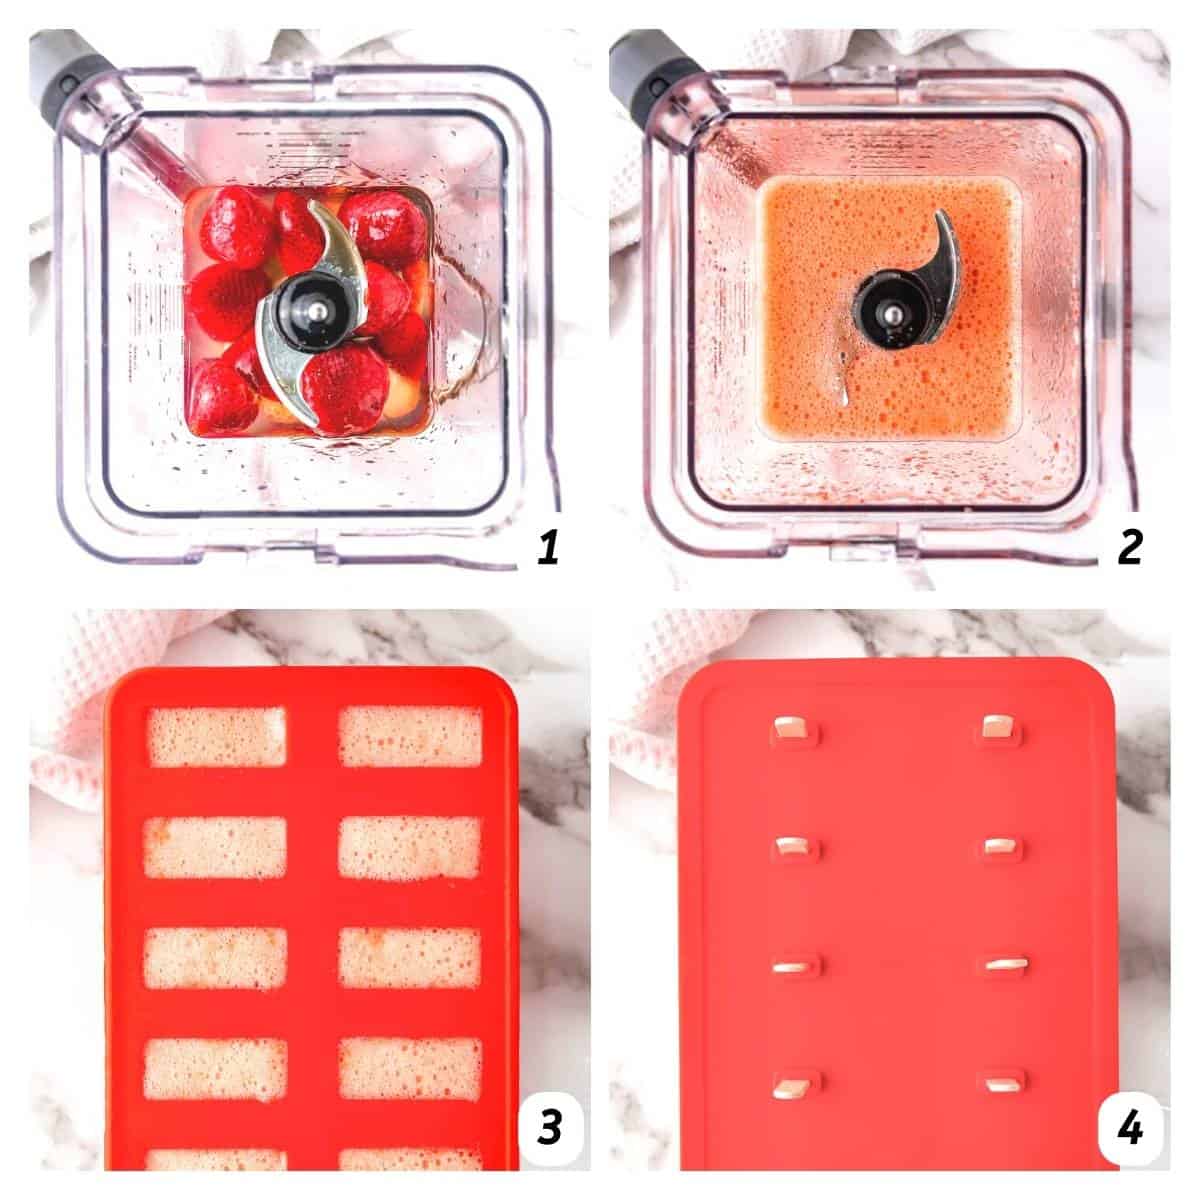 Four panel grid of process shots - blending together ingredients, filling popsicle molds, and freezing.